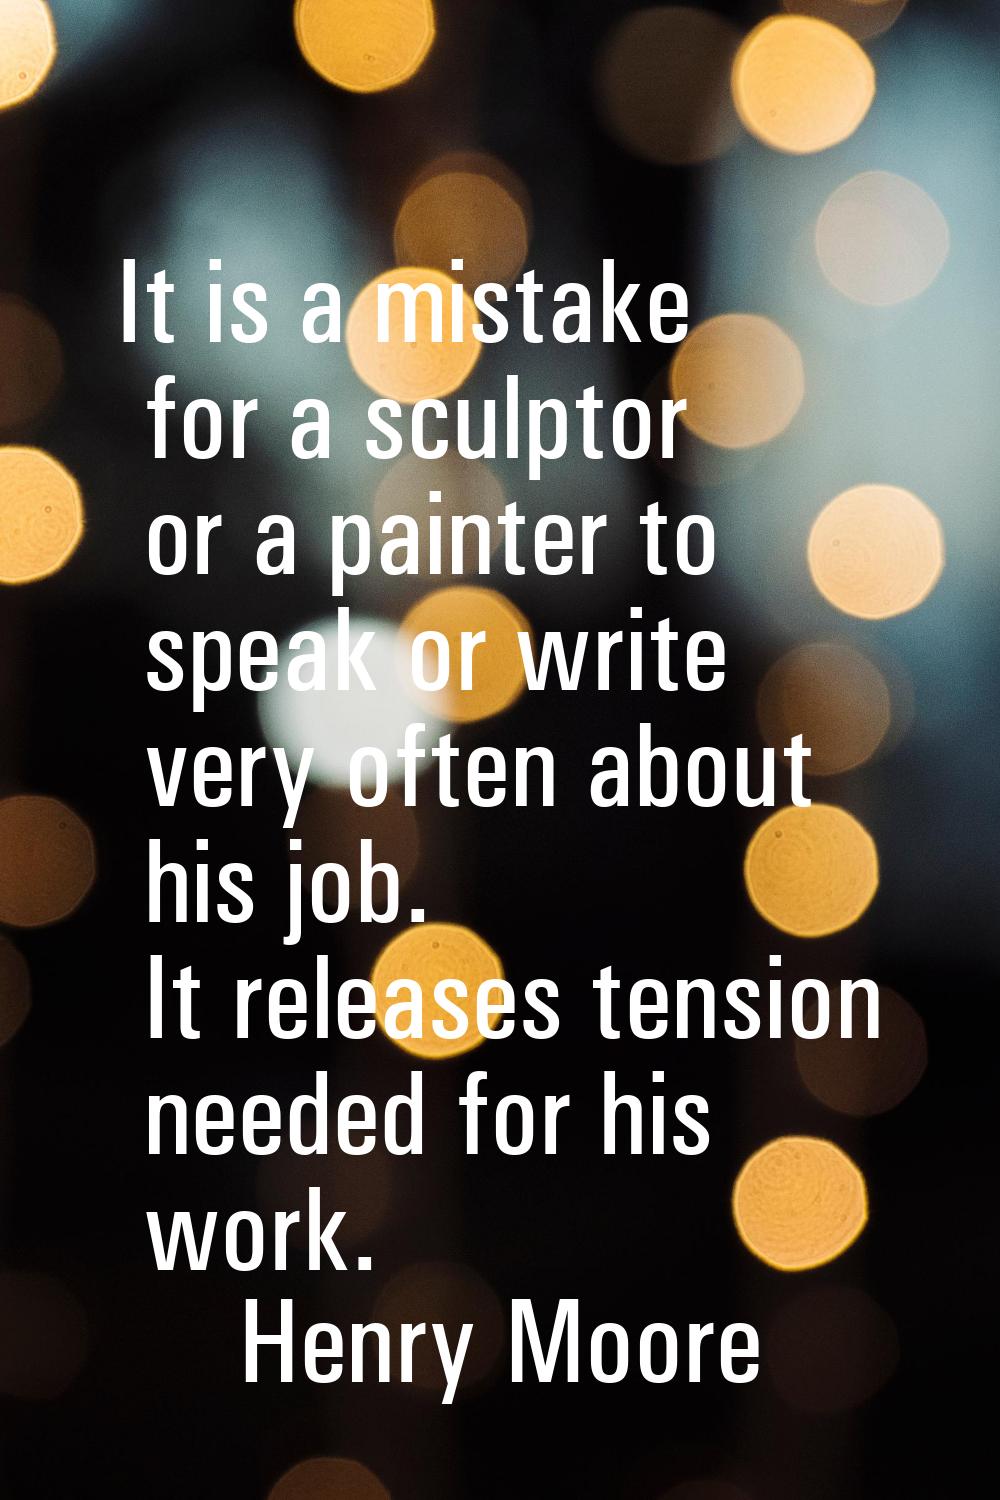 It is a mistake for a sculptor or a painter to speak or write very often about his job. It releases